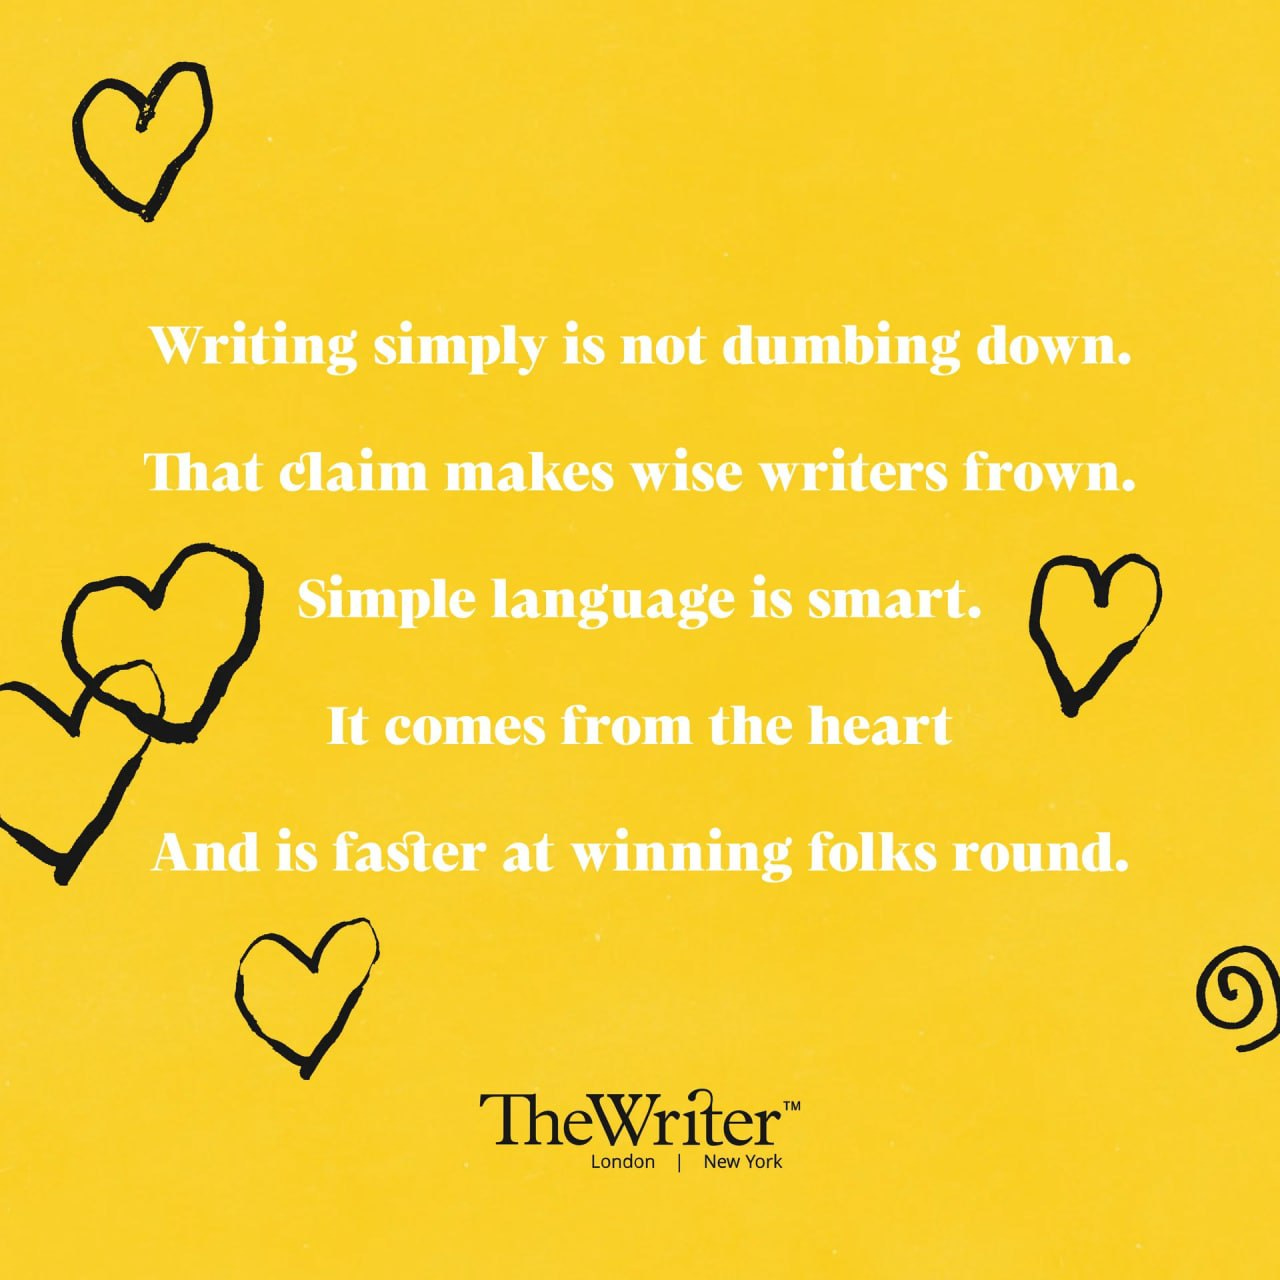 Writing simply is not dumbing down. That claim makes wise writers frown. Simple language is smart. It comes from the heart And is faster at winning folks round.